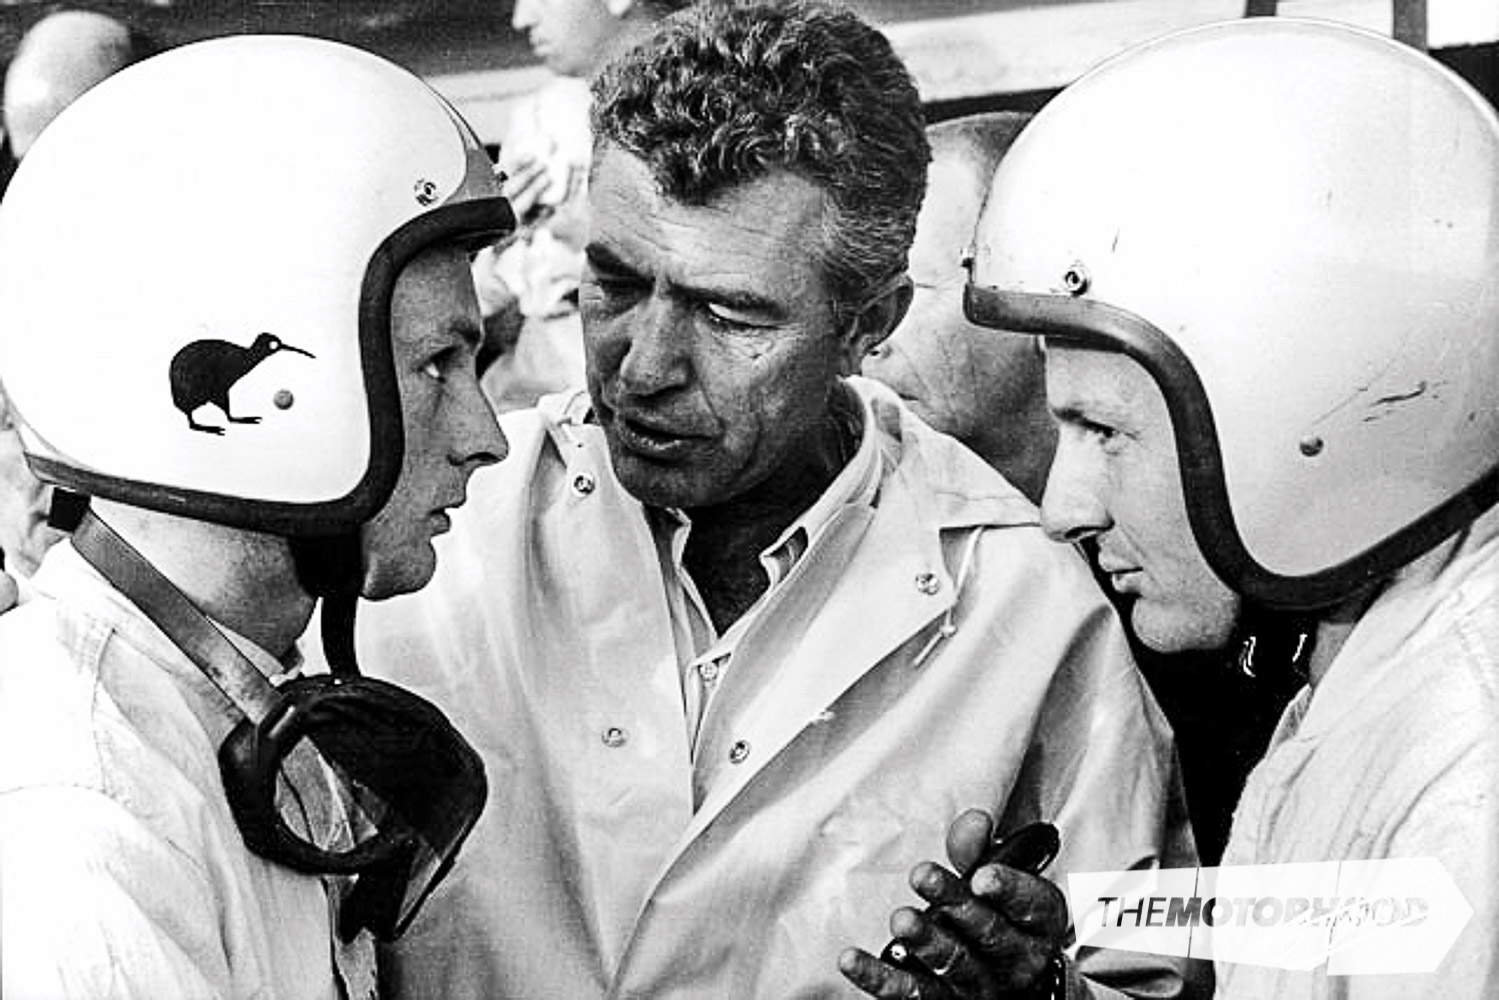 Caroll-Shelby-talks-to-Amon-left-and-McLaren-at-Le-Mans.jpg